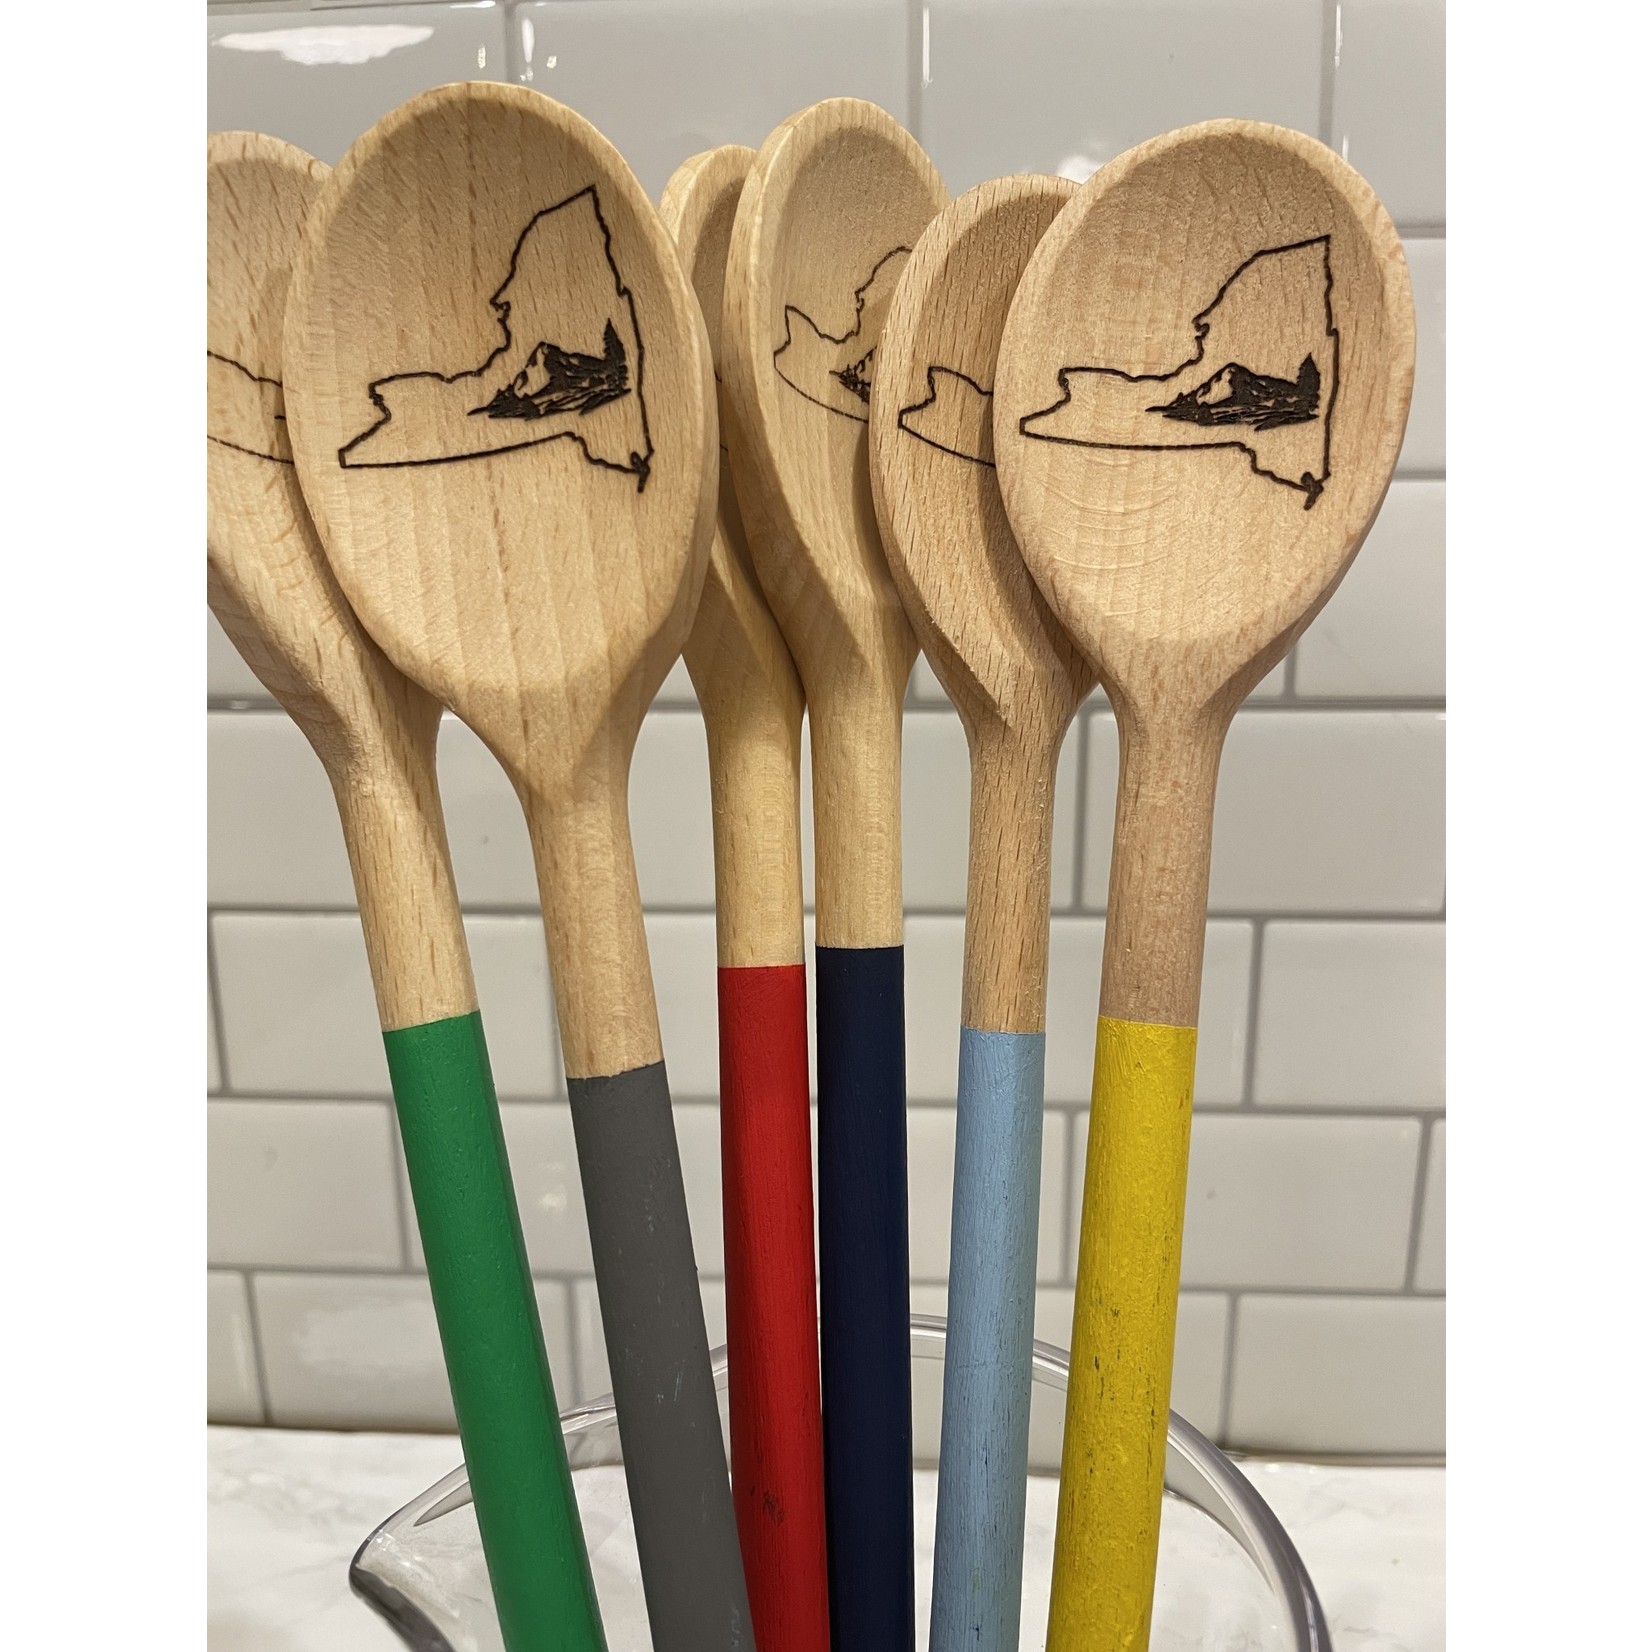 New York Wooden Spoon Collection